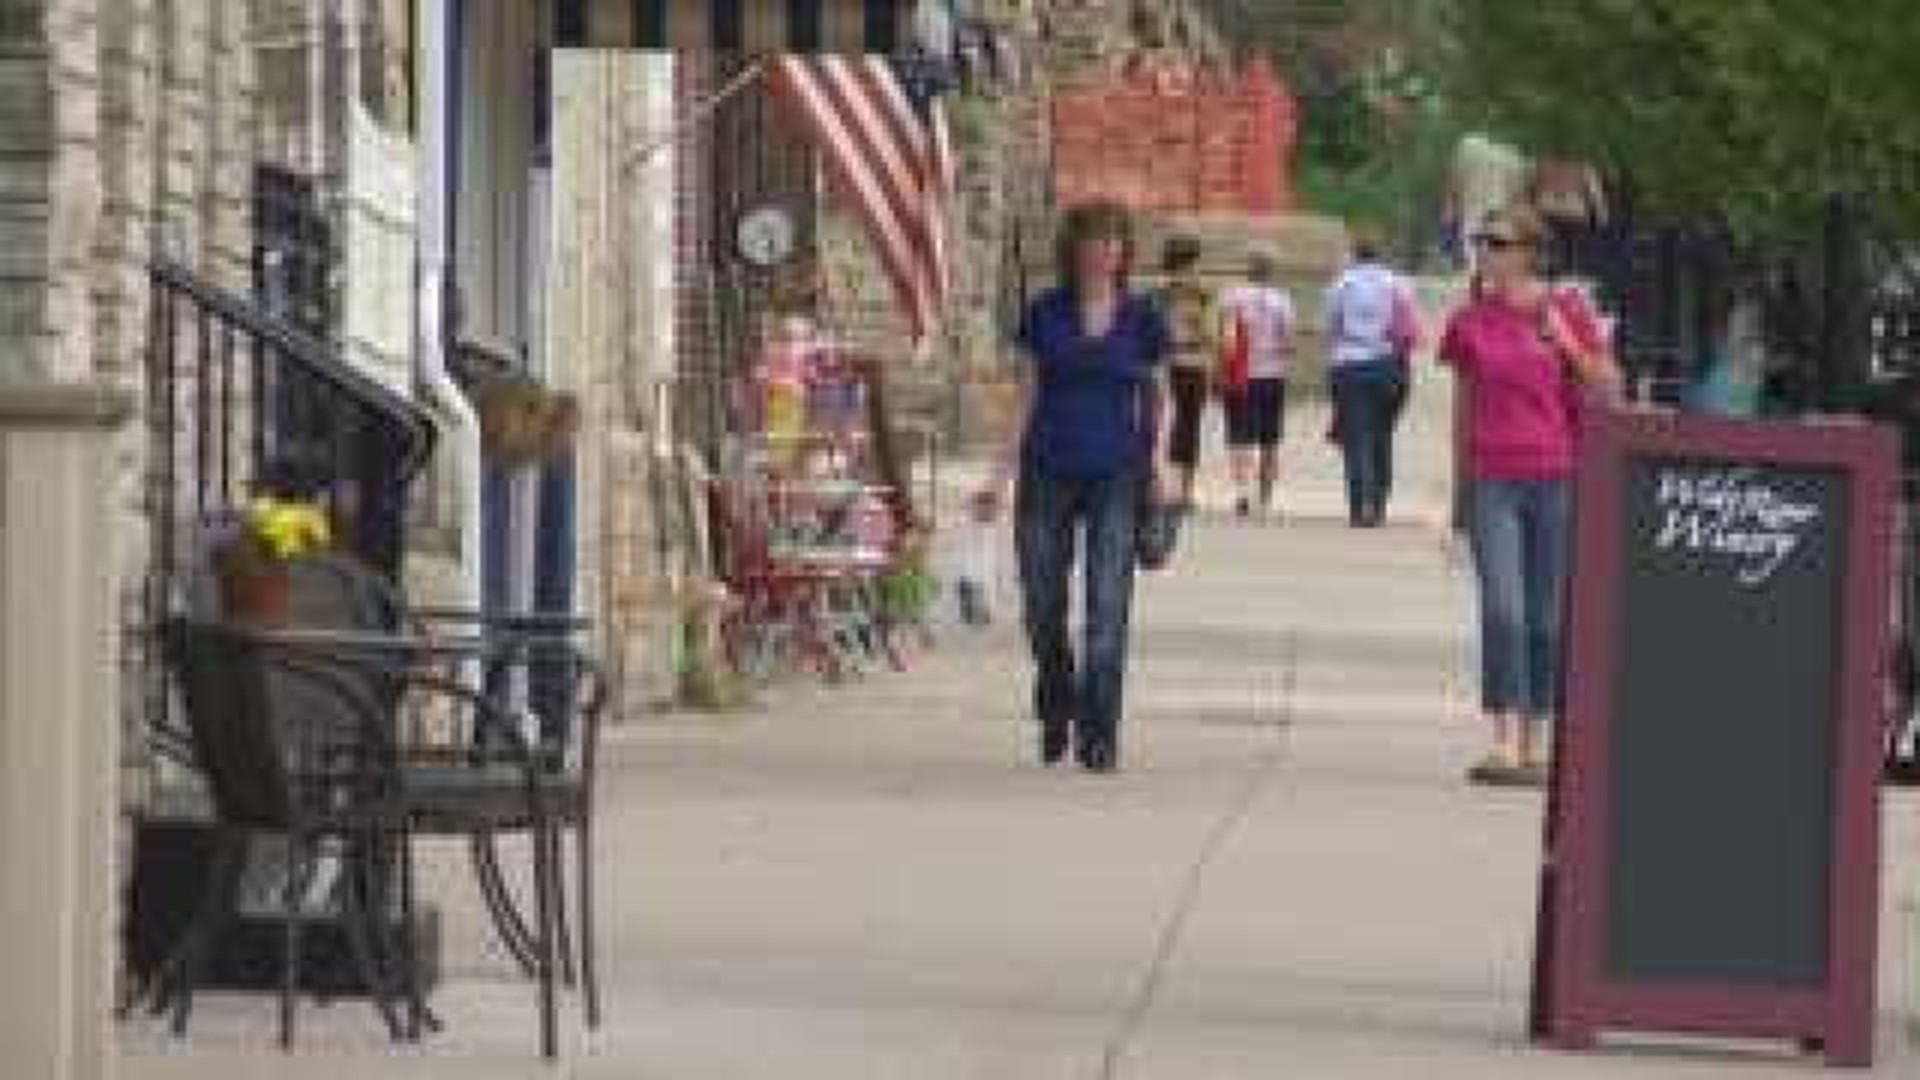 Le Claire reacts to Iowa tax relief deal